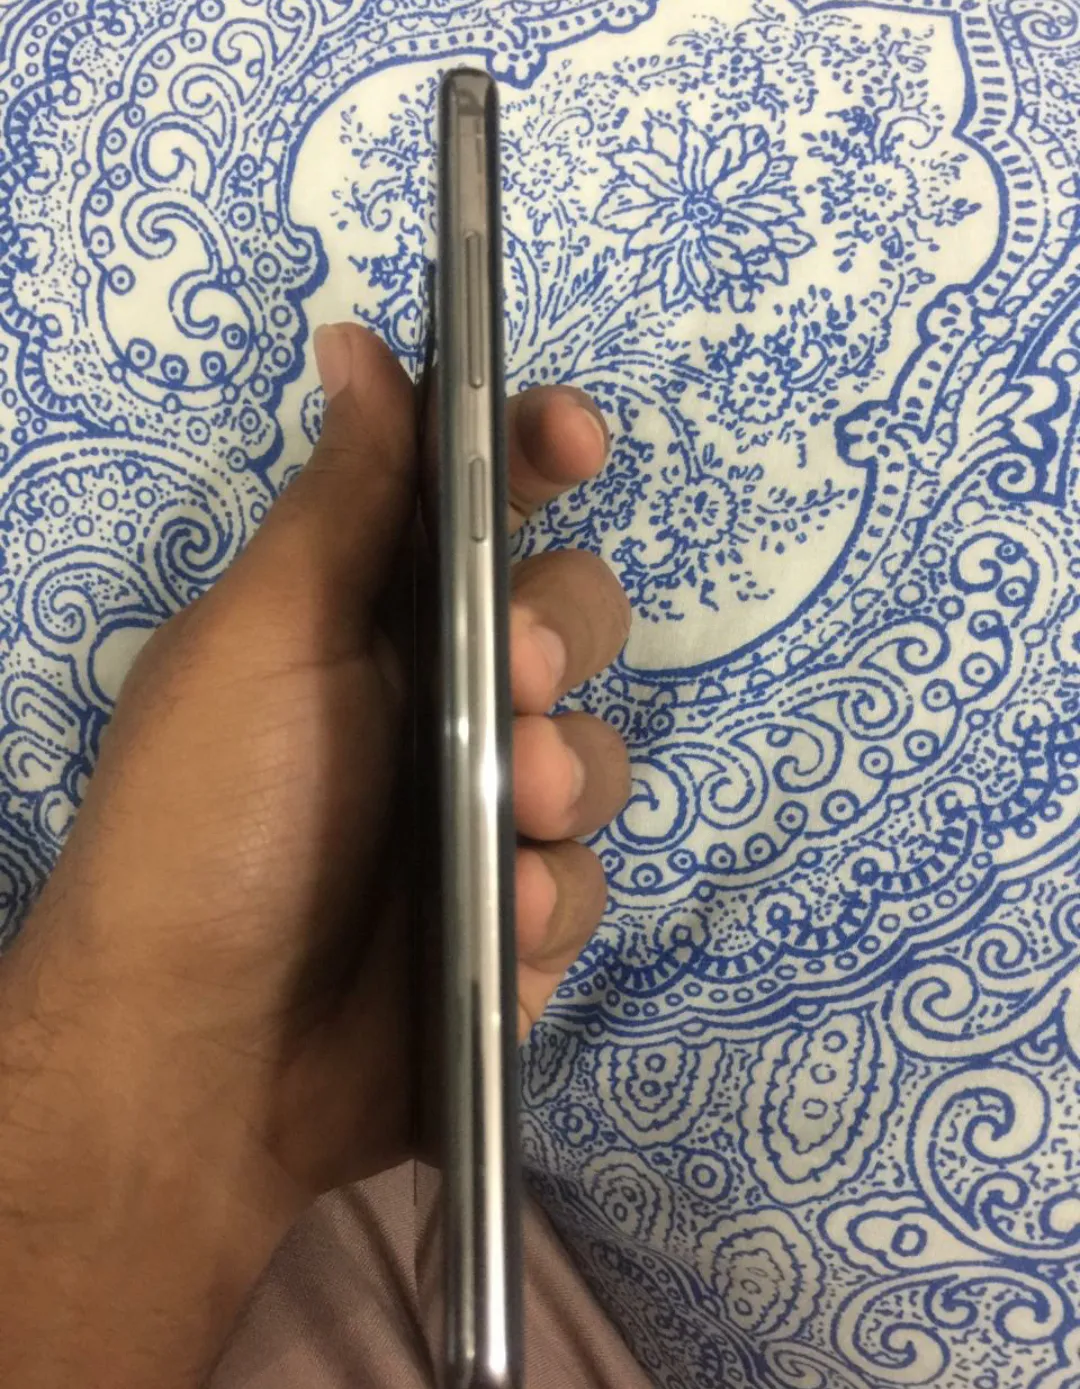 Samsung s10 plus 128gb Scratchless Mint condition 10/10 for sale - photo 2